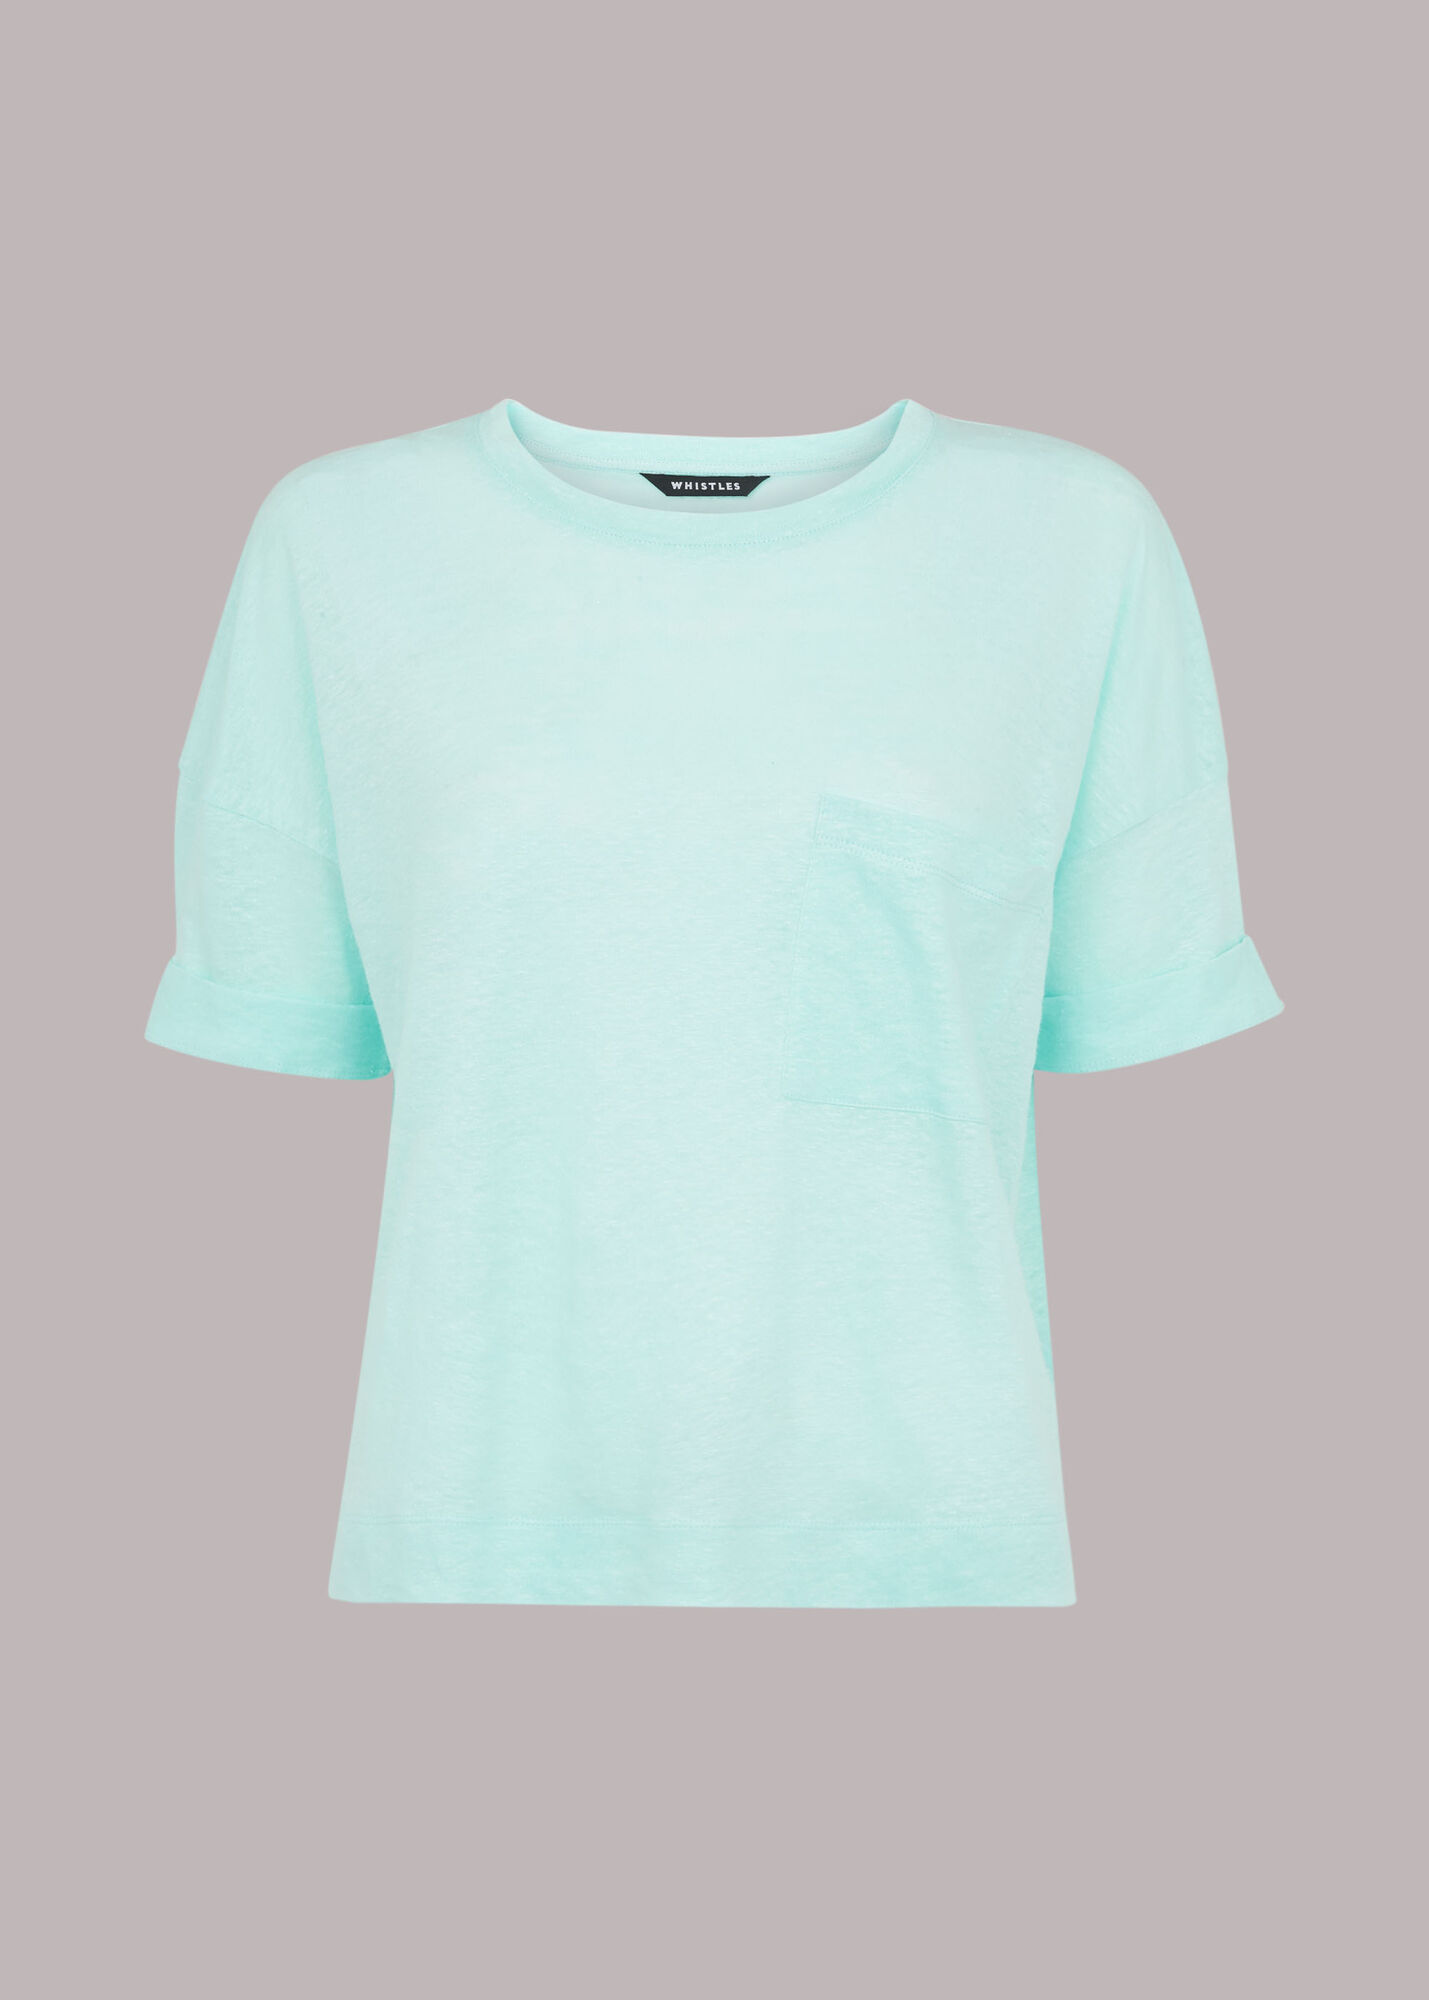 Turquoise Linen Pocket Top | WHISTLES